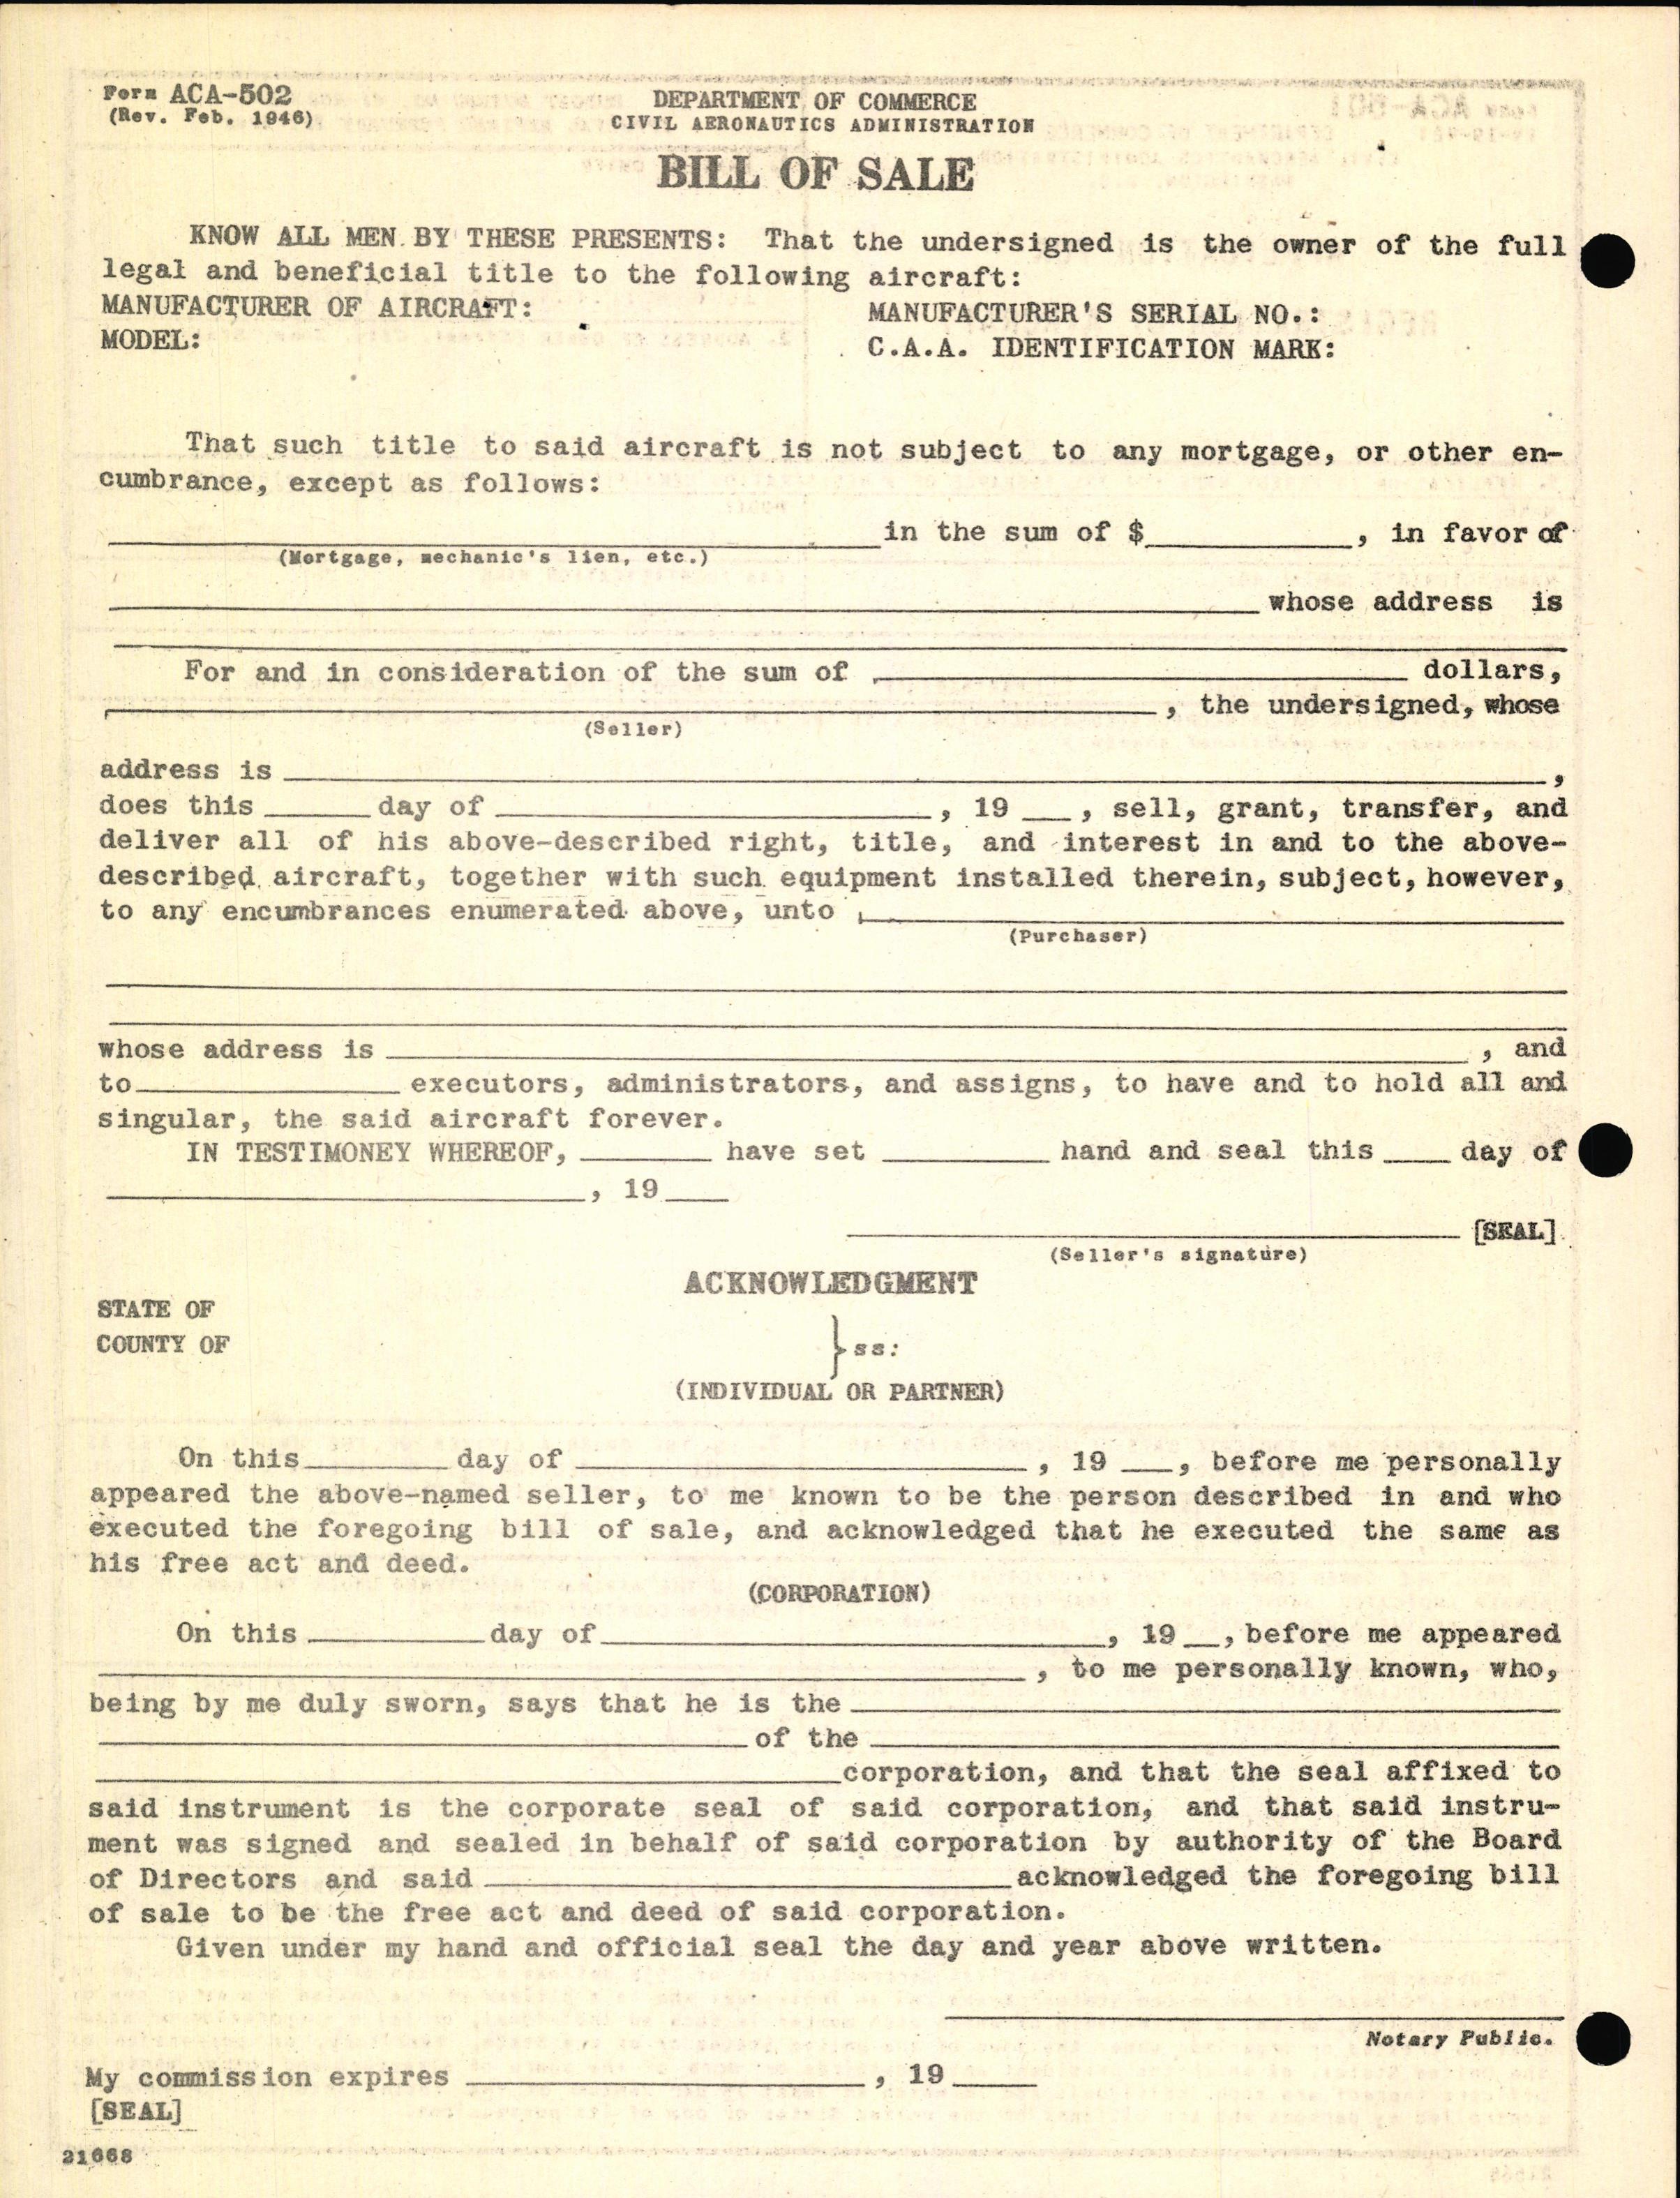 Sample page 4 from AirCorps Library document: Technical Information for Serial Number 2054